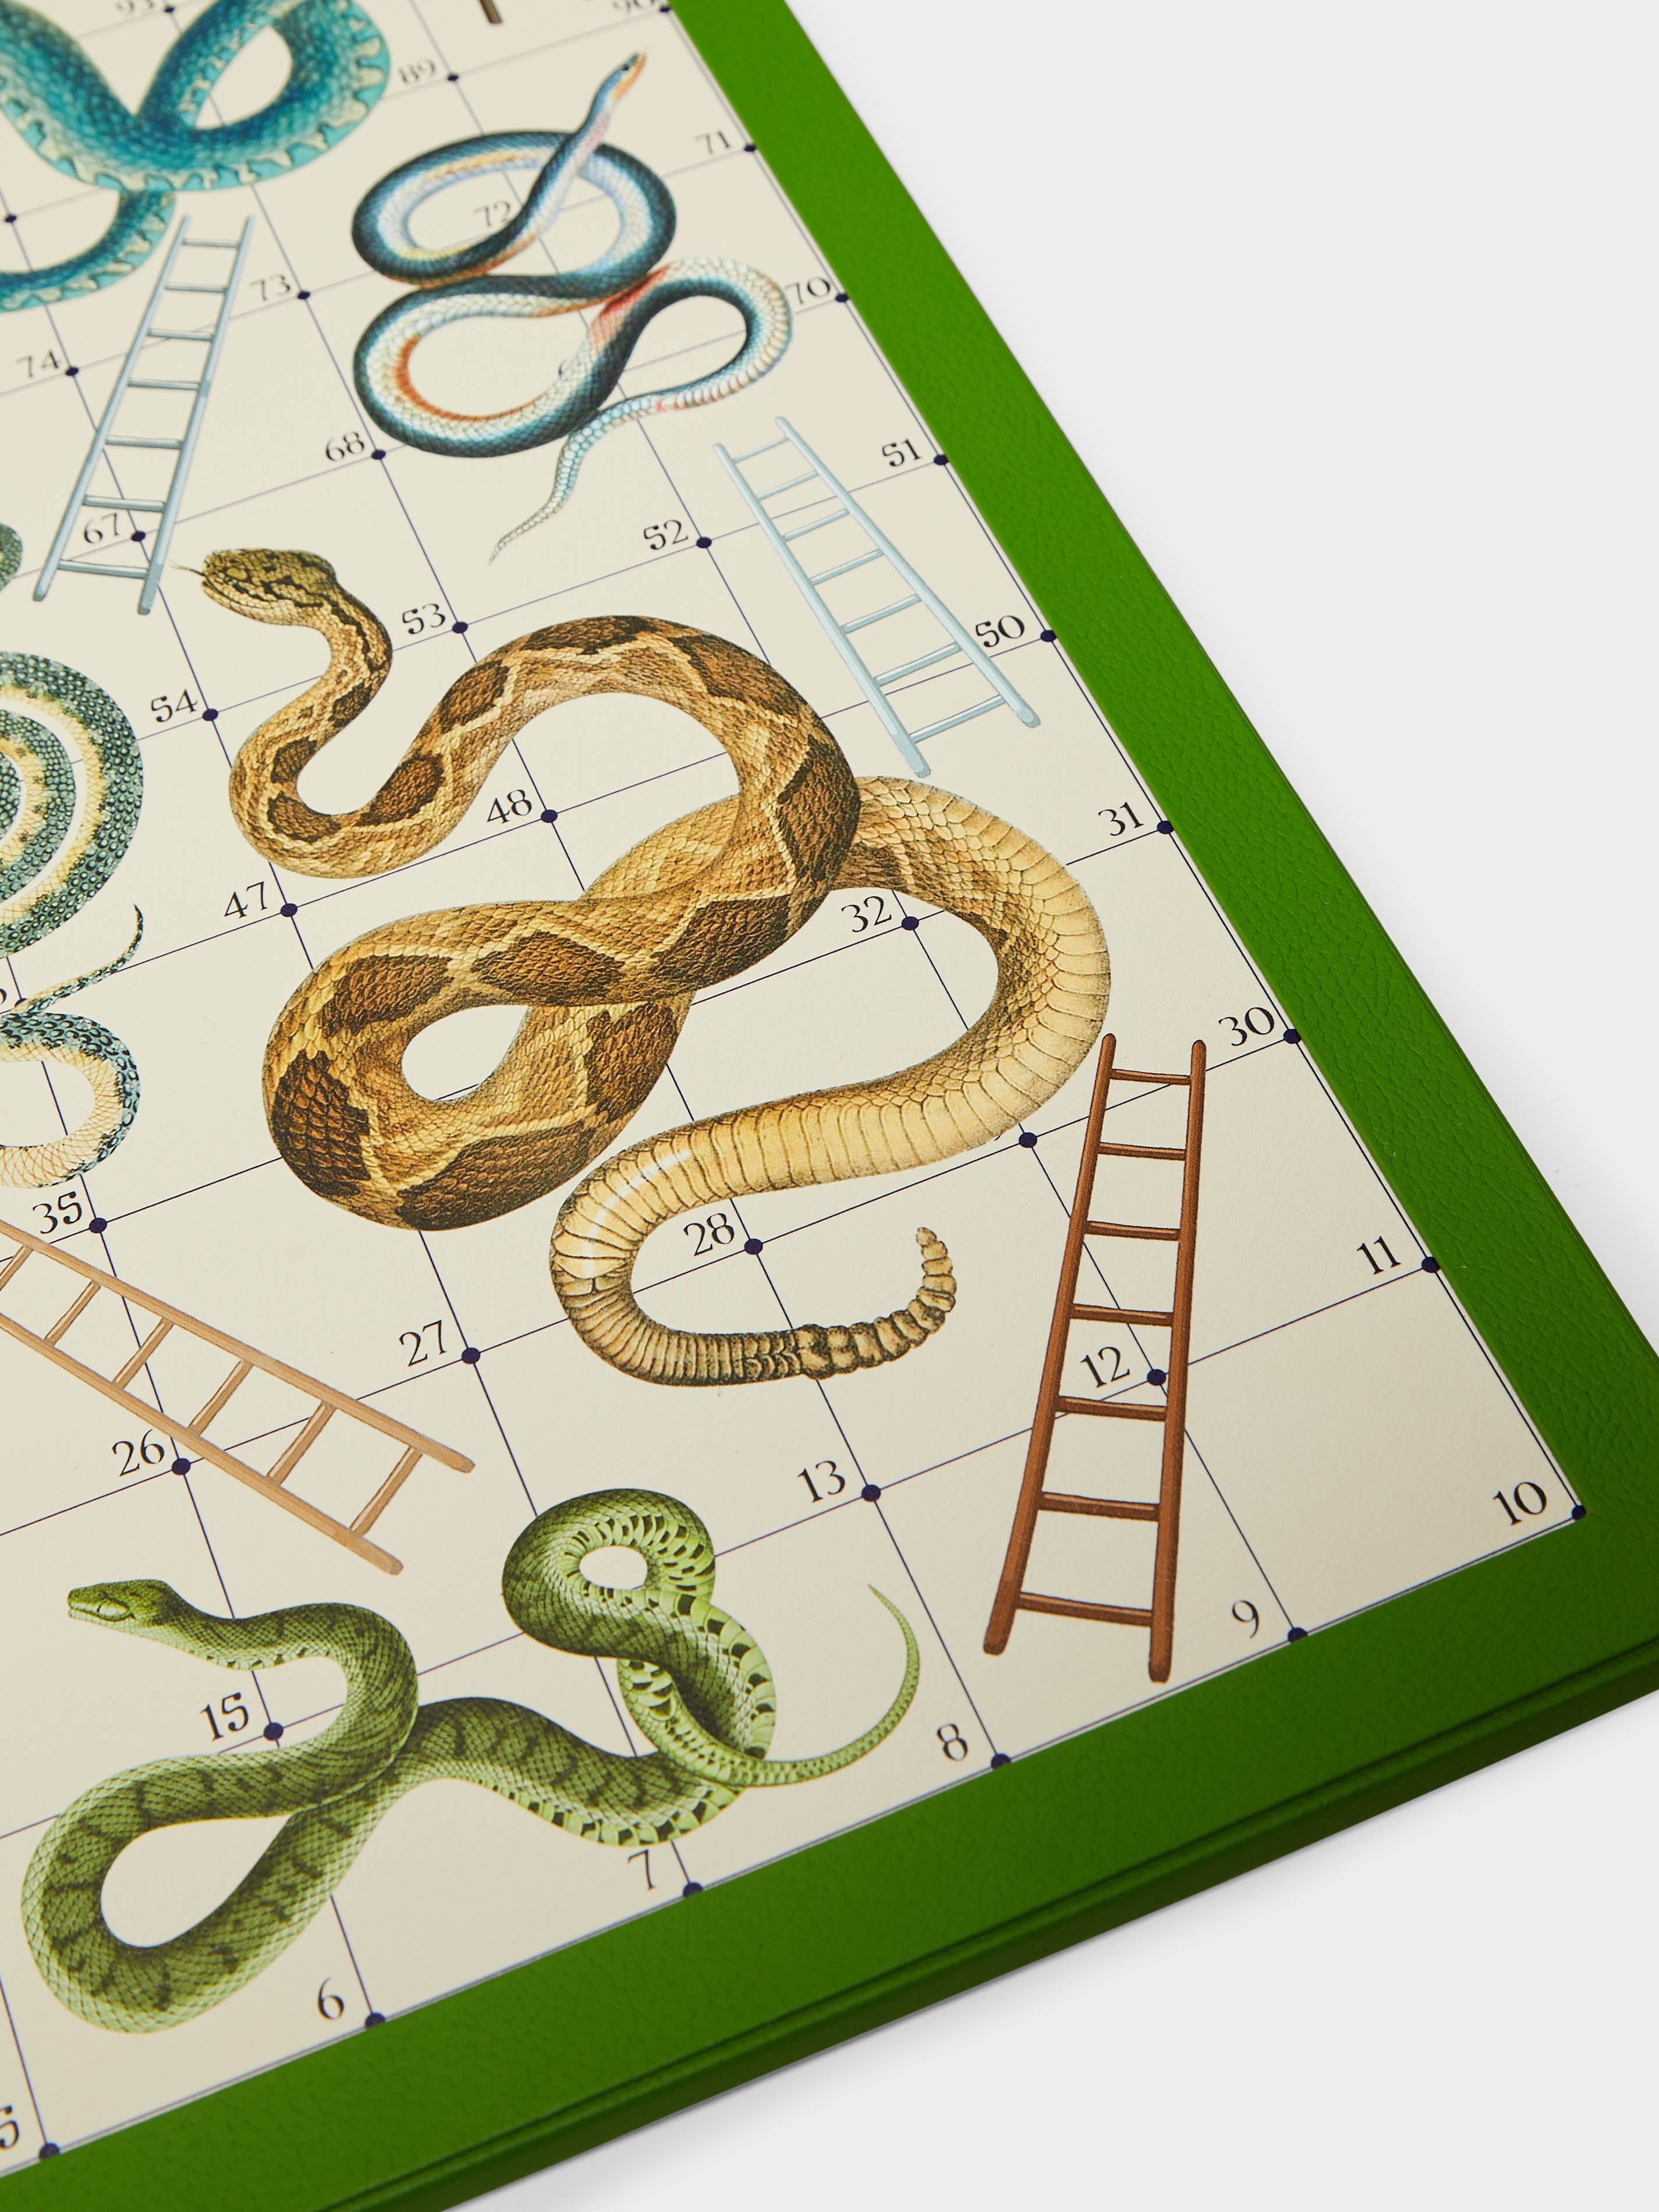 Books and Ladders Classic Board Game – Galison